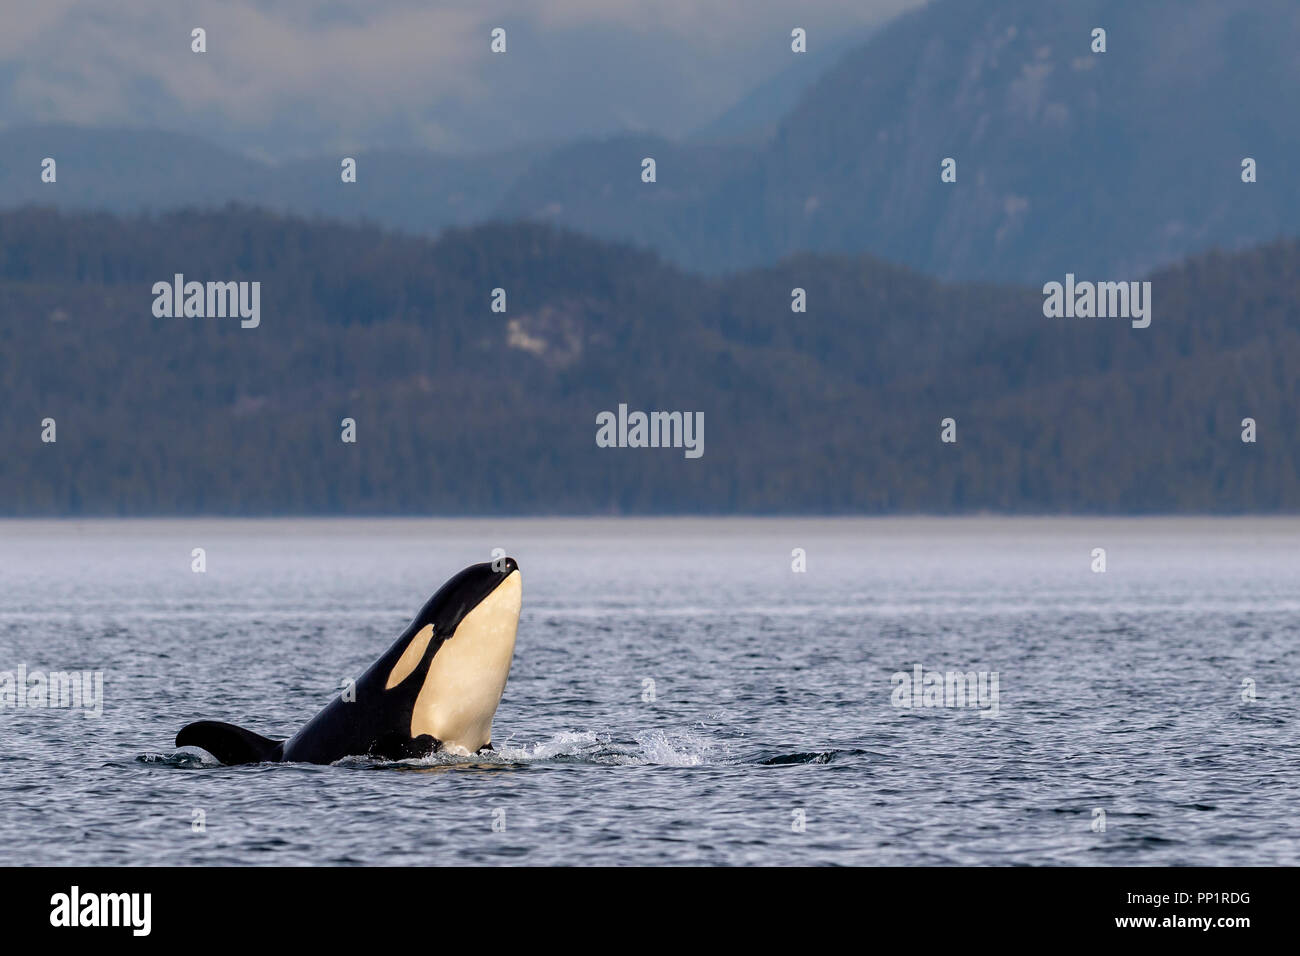 Northern resident orca whale (killer whales, Orcinus orca) spy-hopping in Queen Charlotte Strait close to the Great Bear Rainforest, British Columbia  Stock Photo